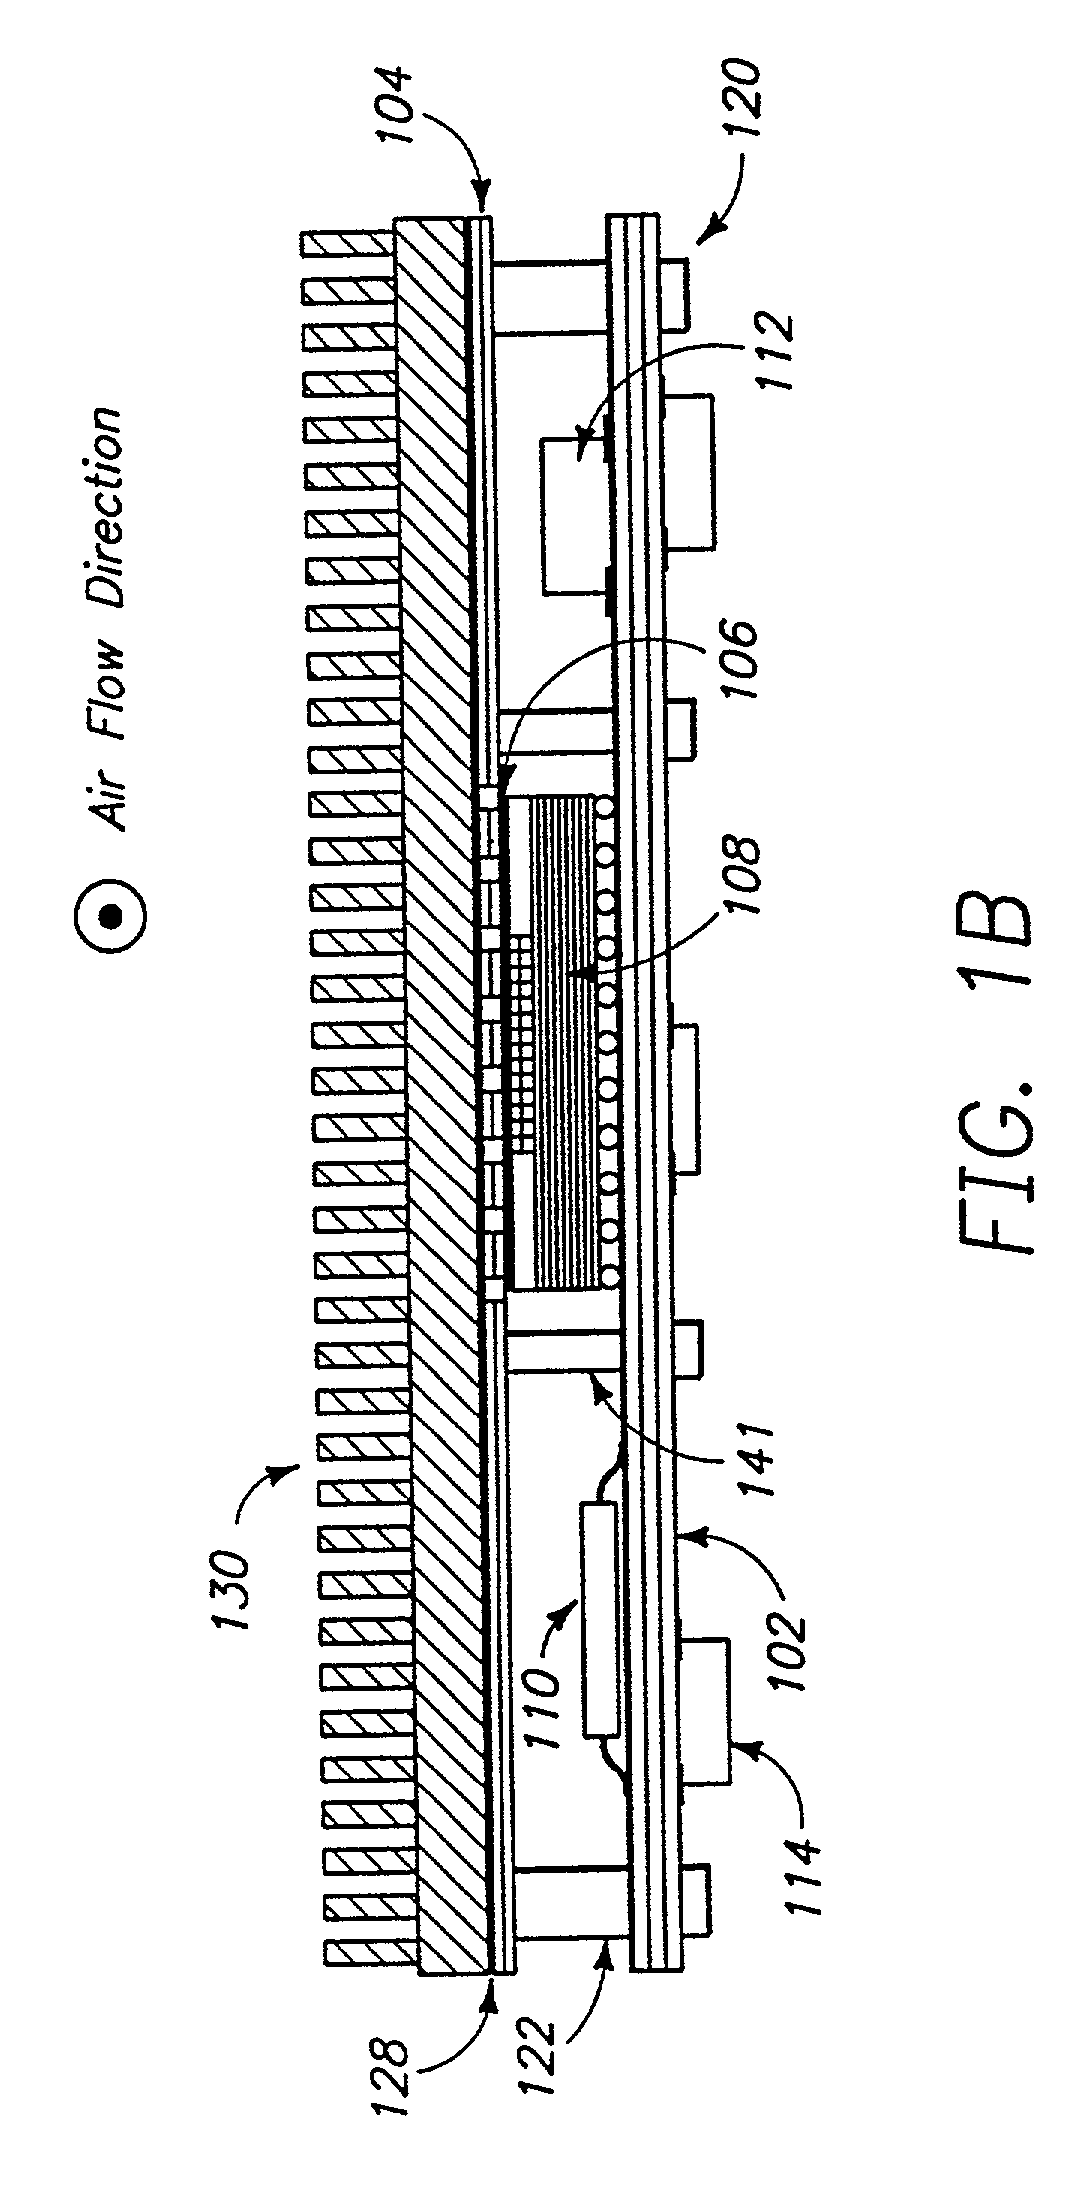 Inter-circuit encapsulated packaging